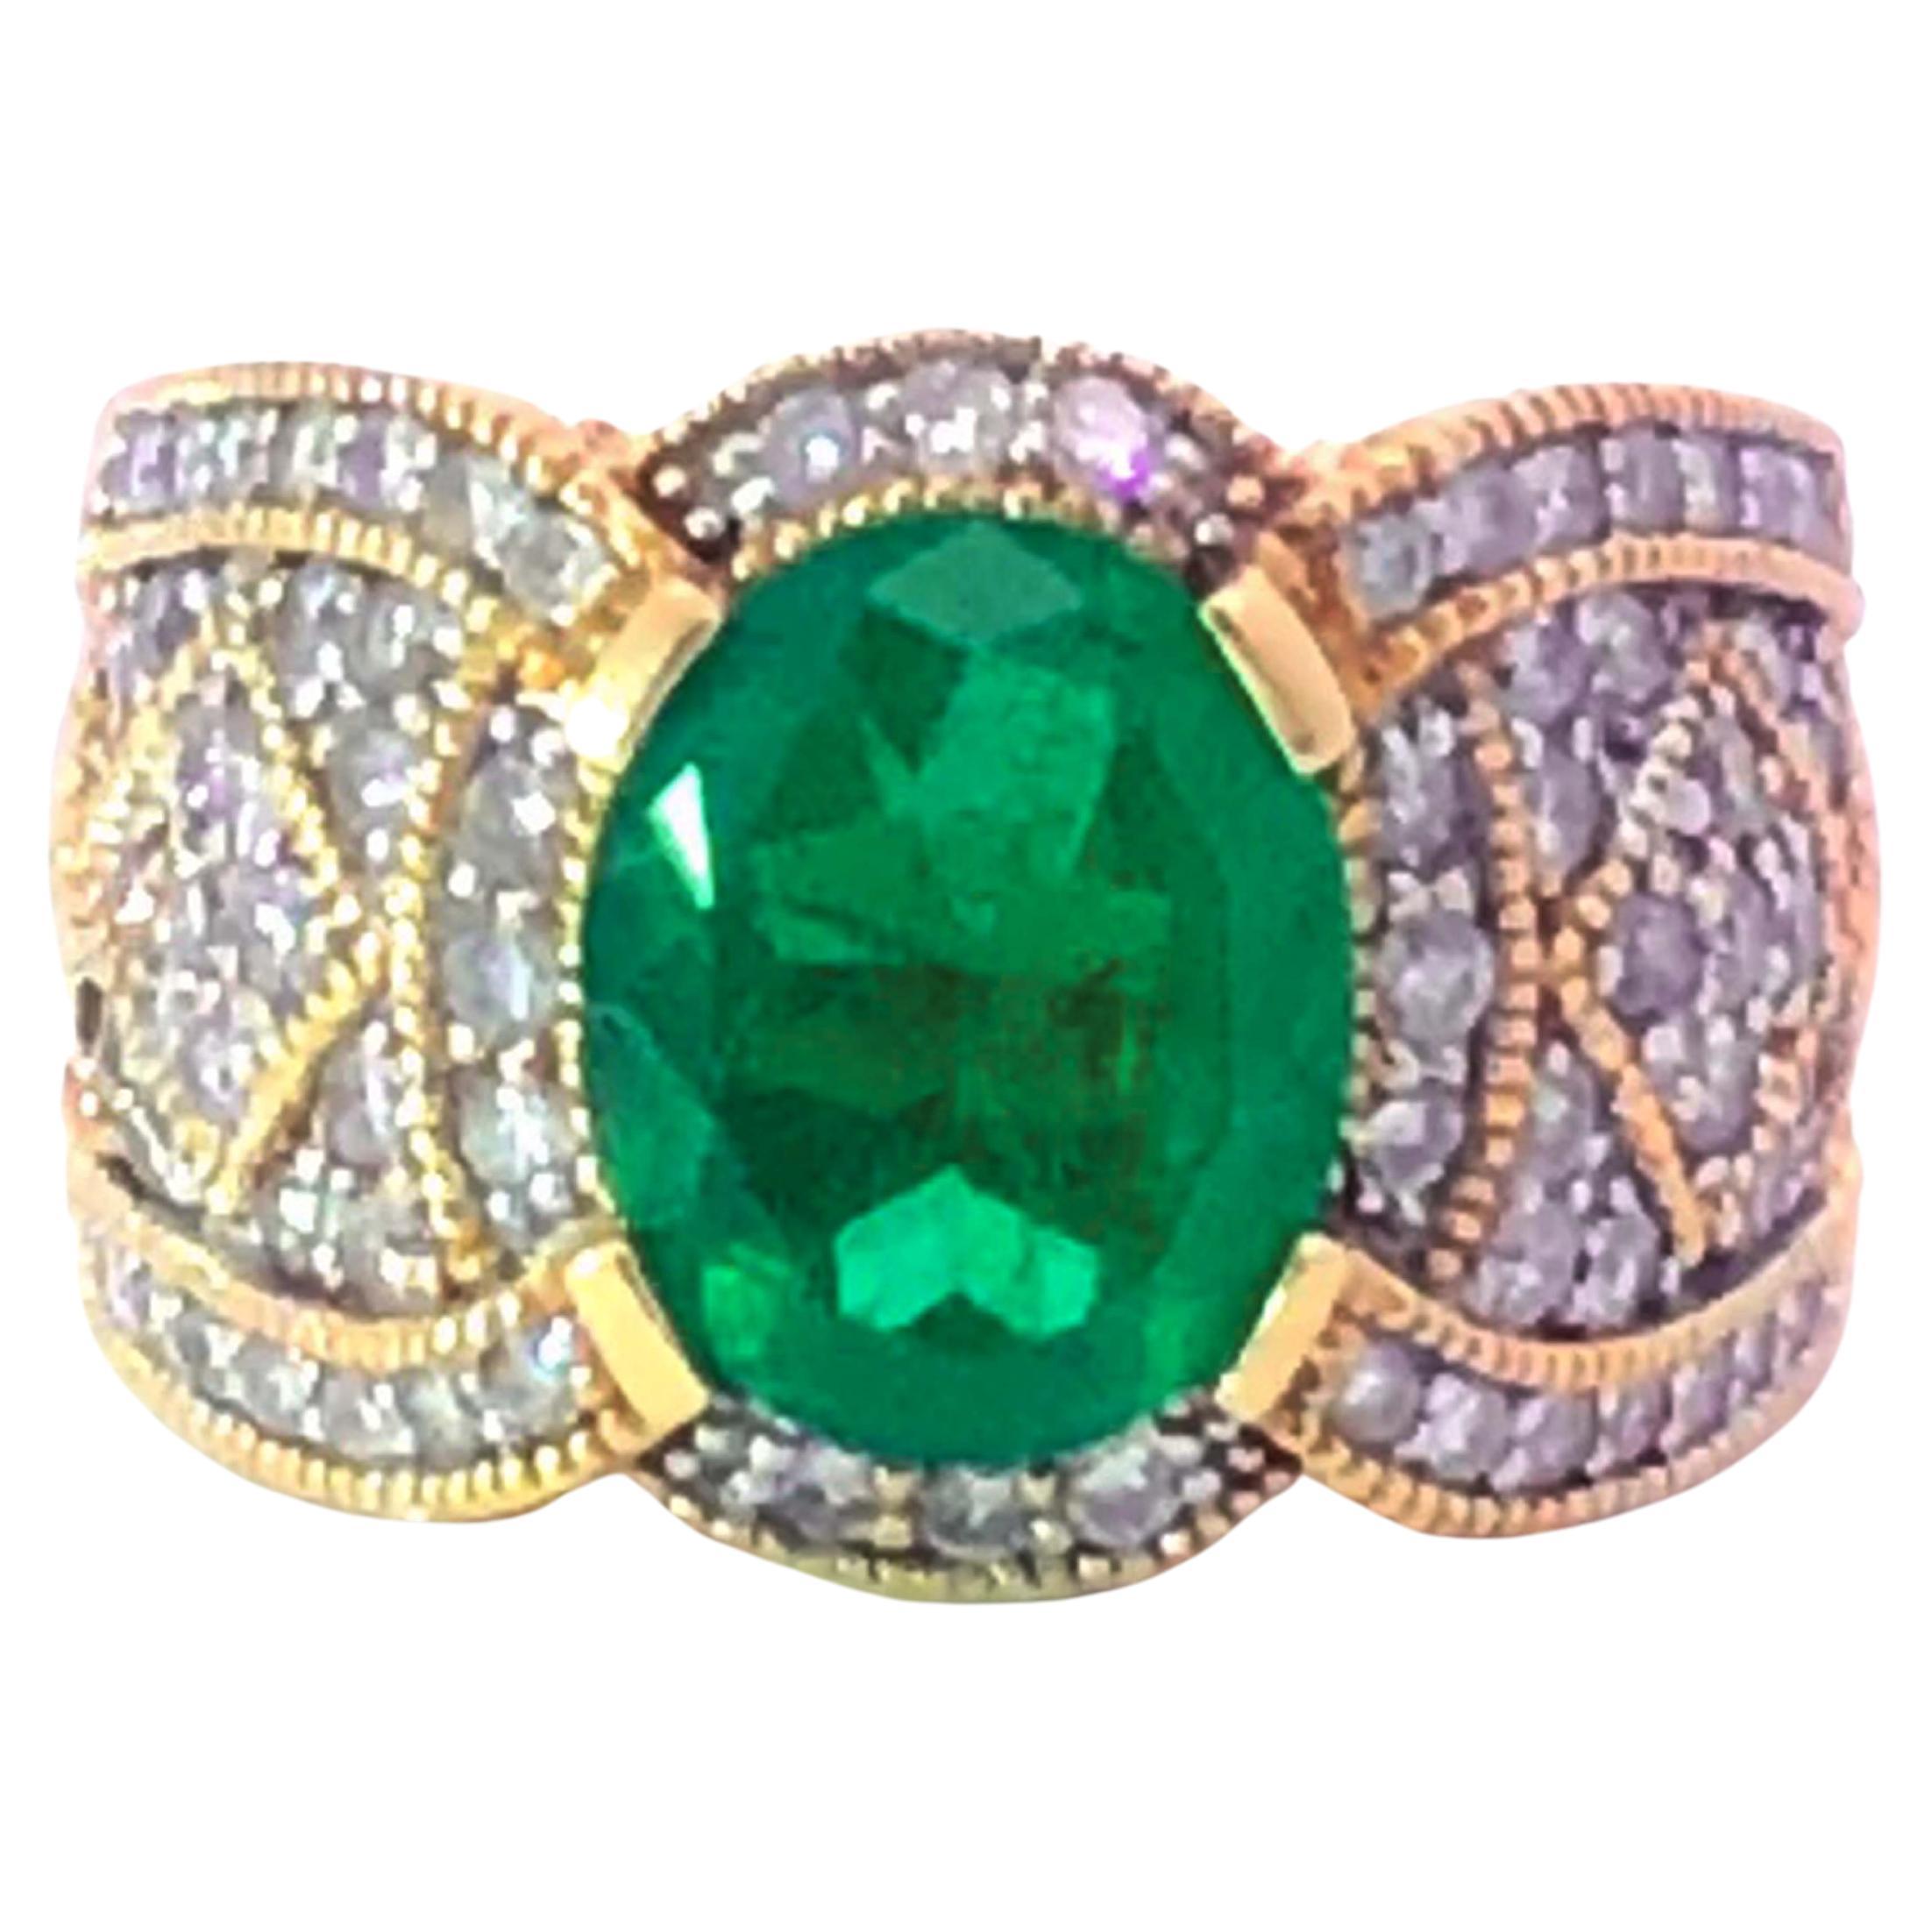 GIA Rare 2.65 Ct. Colombian Emerald & Diamond Cigar Band Ring in 14k Yellow Gold